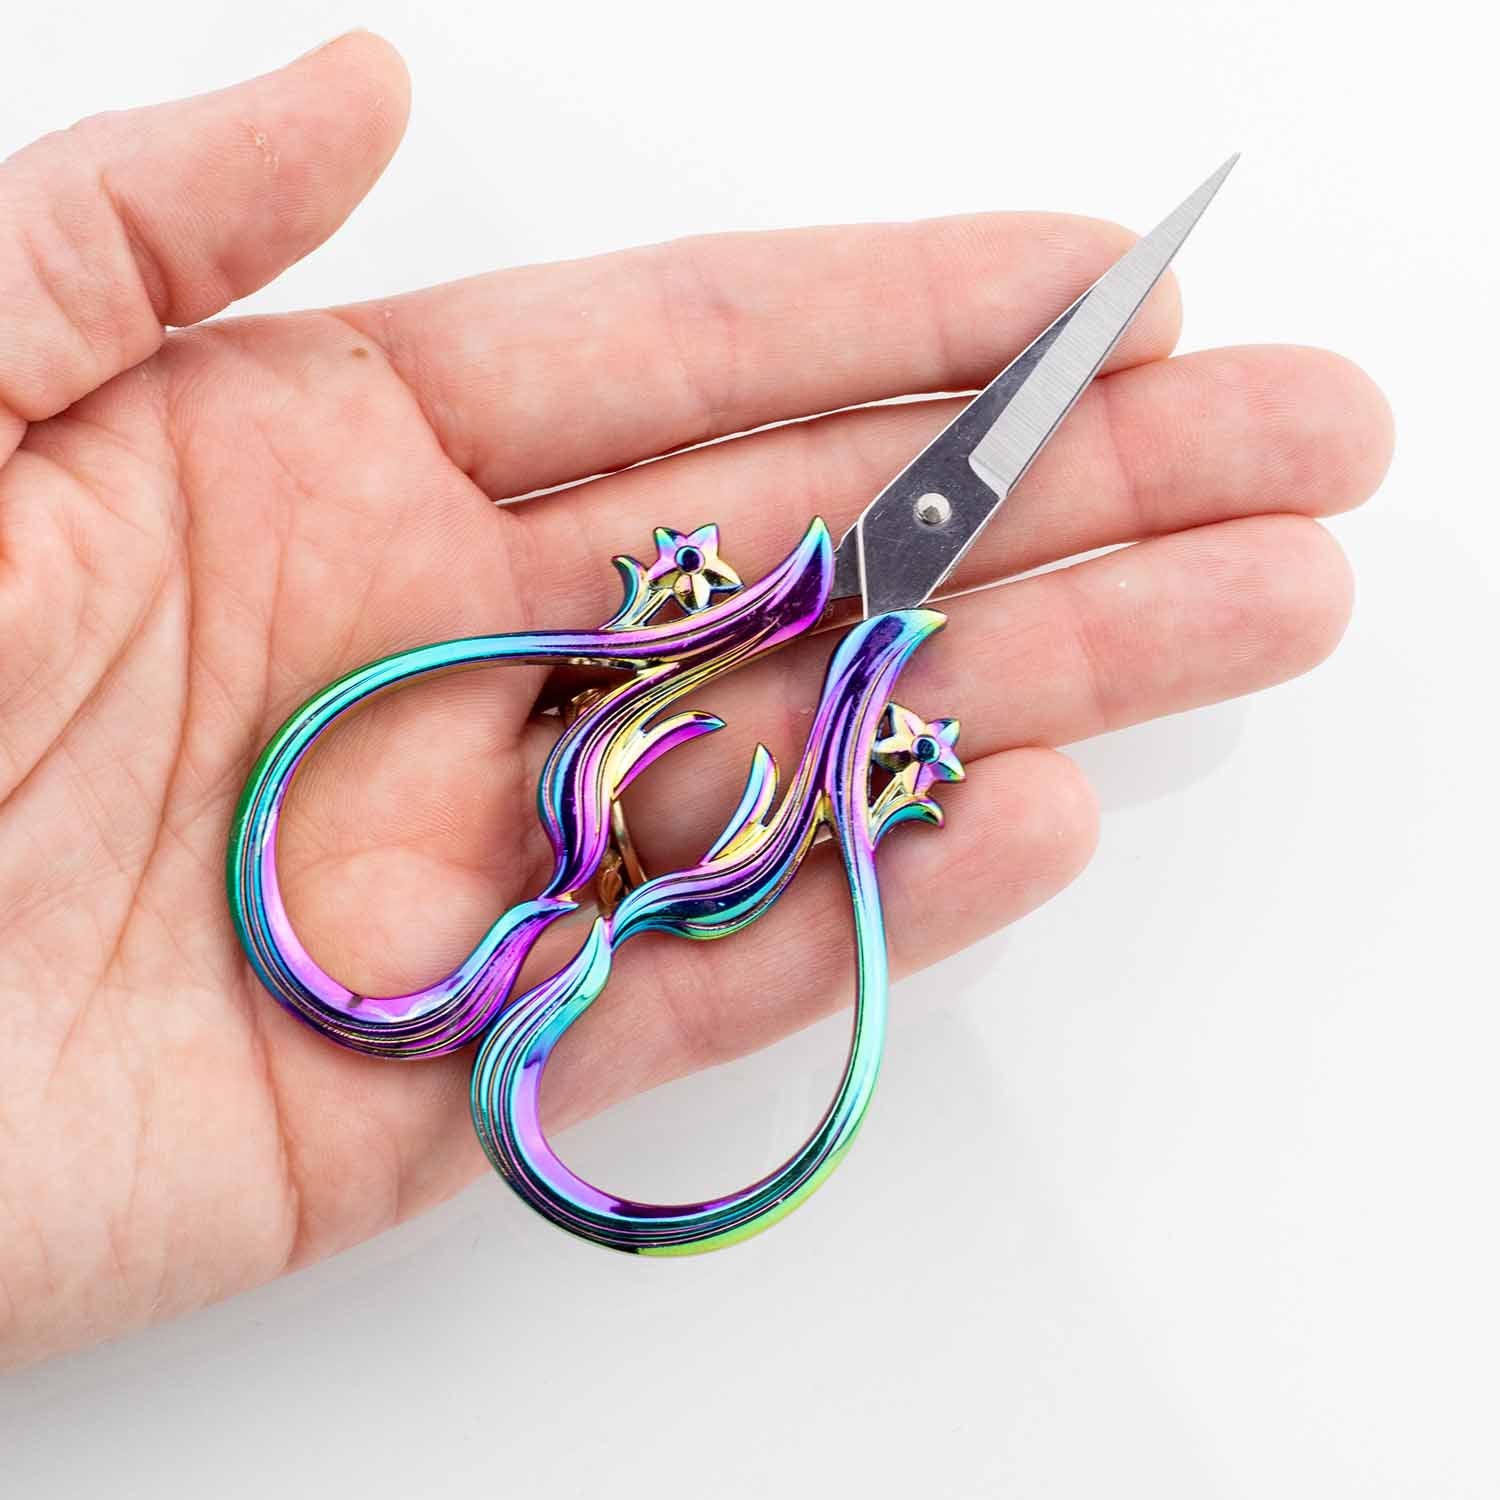 Embroidery Kits Include 2 Pairs Vintage Scissors, Ghana